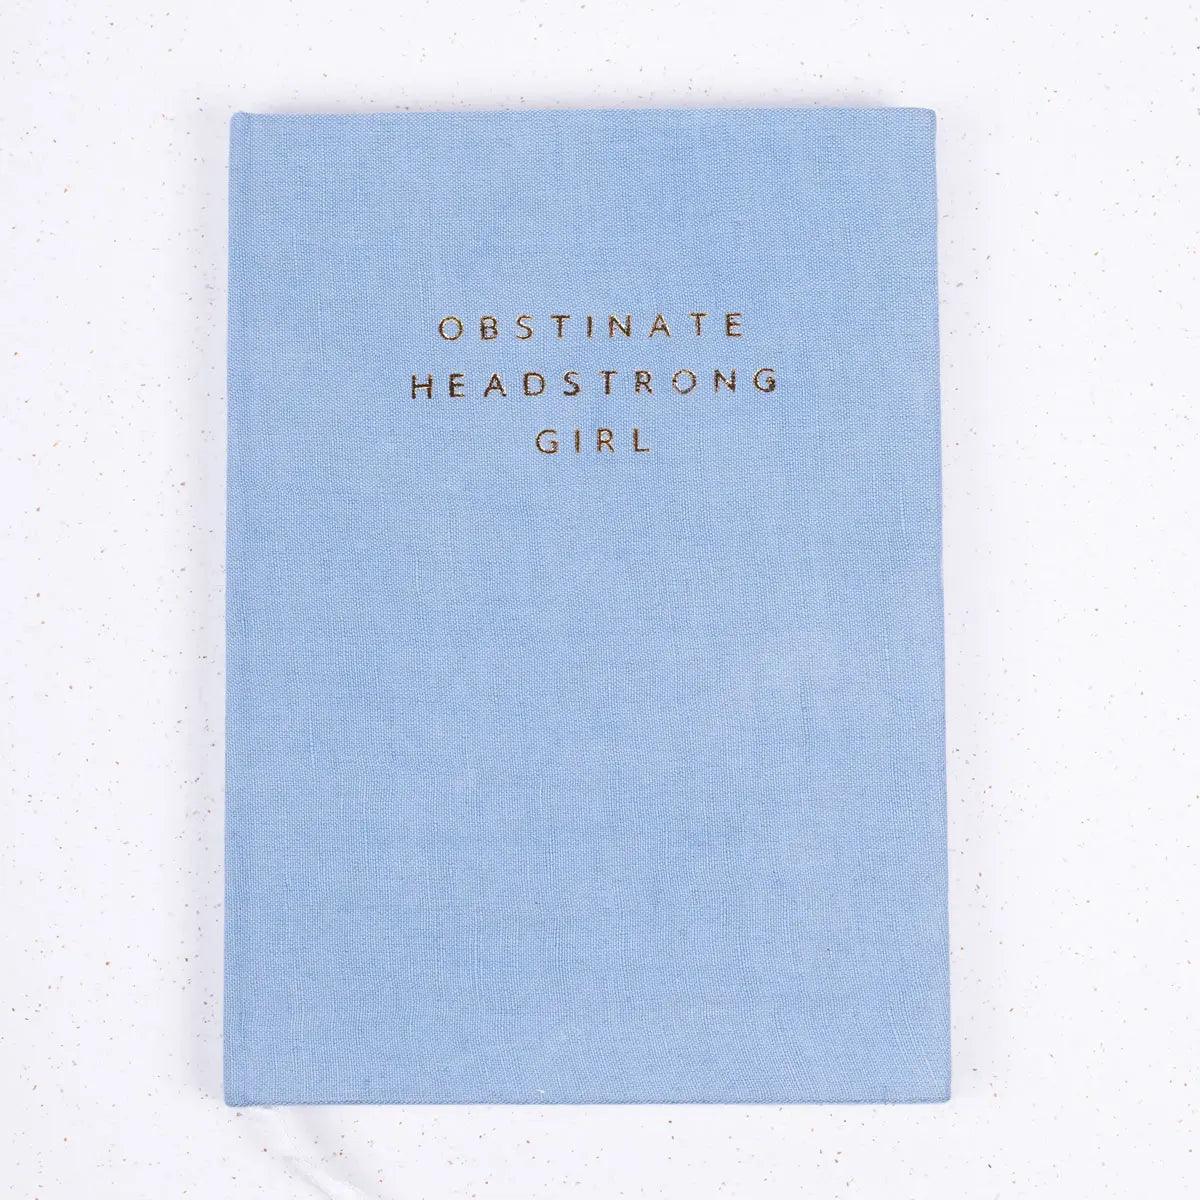 Obstinate Headstrong Girl Journal in Blue - Jane Austen Gifts